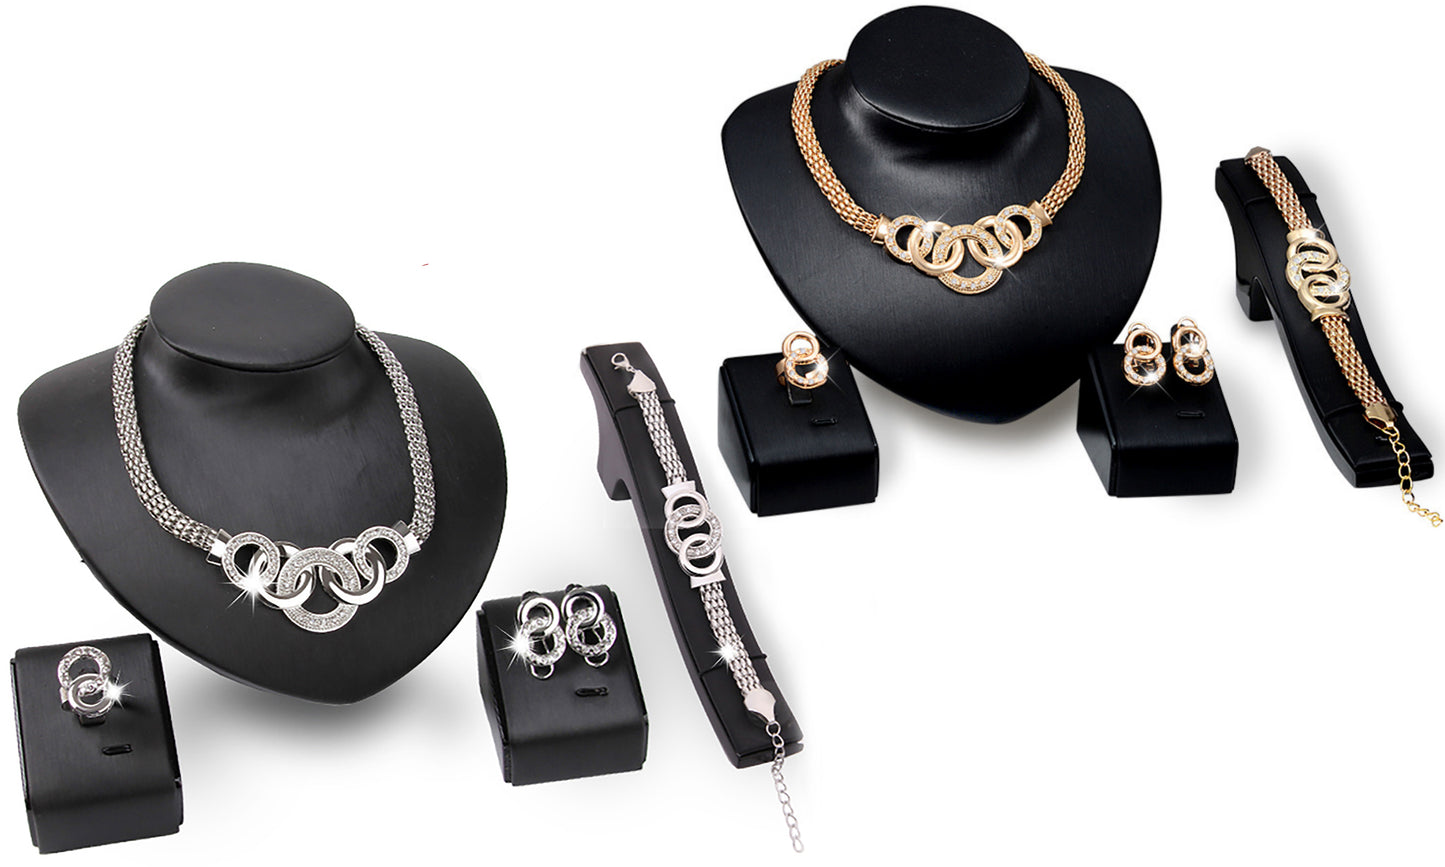 4 piece Mandorla Crystal Jewellery set Encrusted with Crystals from Swarovski® Elements